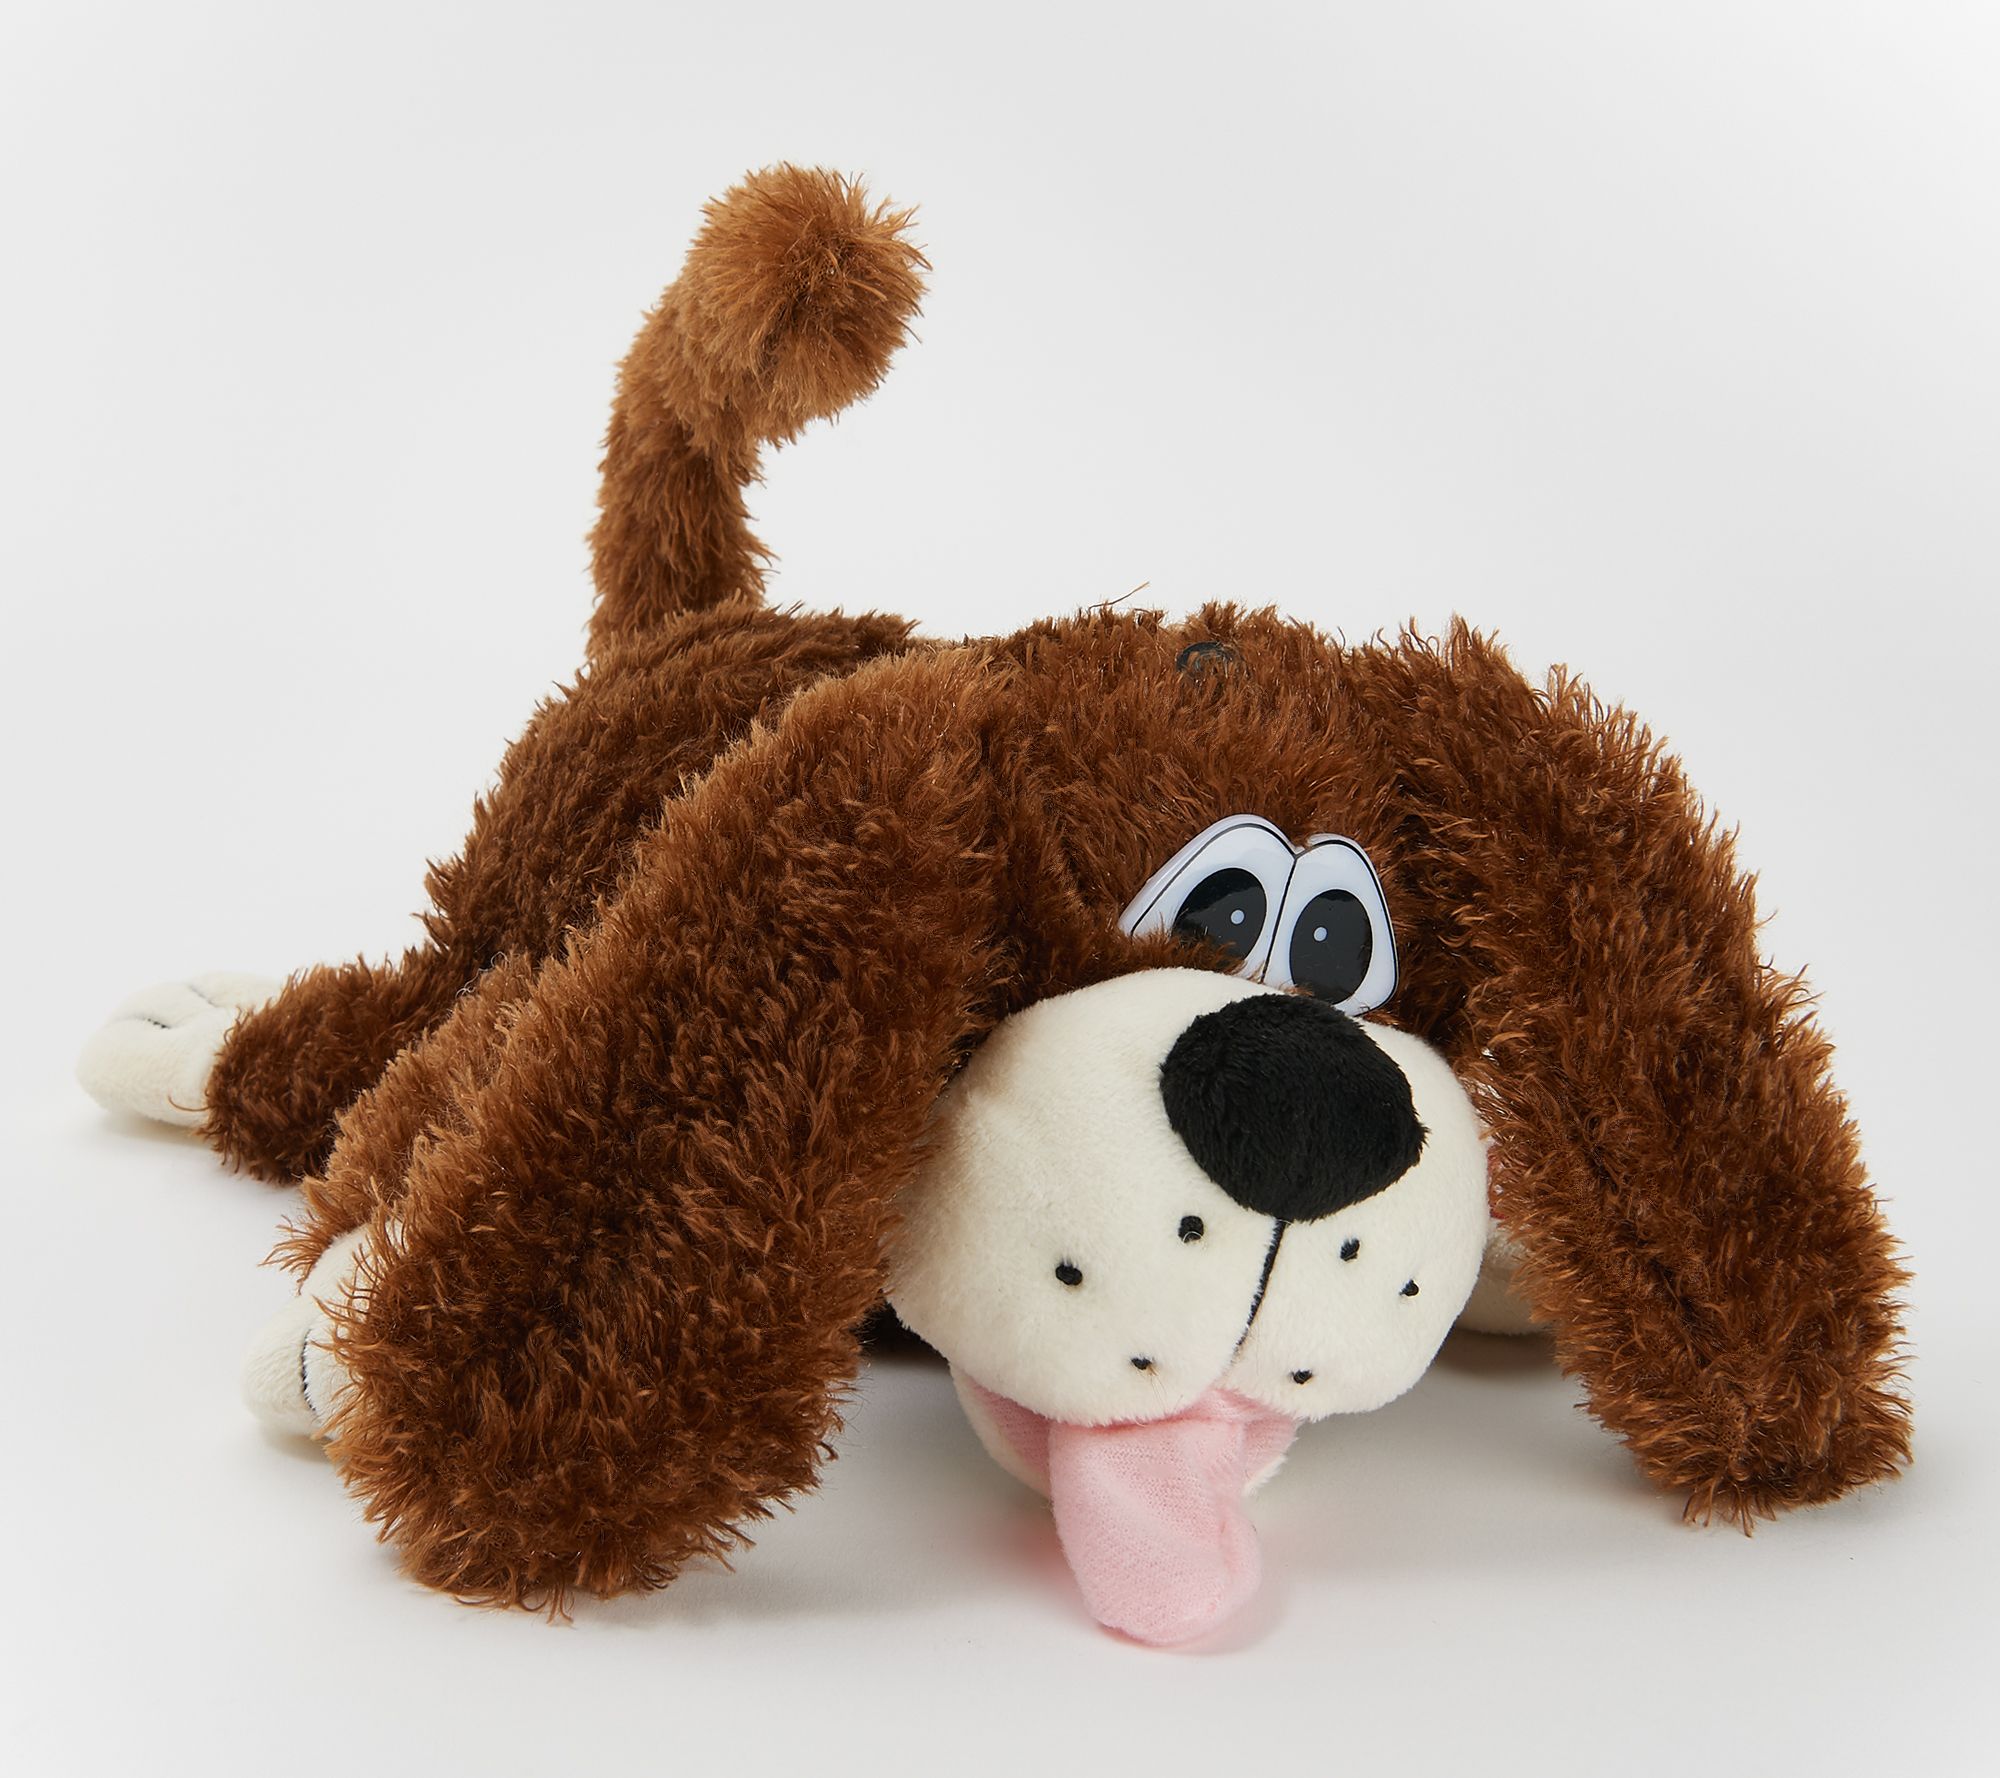 Animated Rolling and Laughing Motion Activated Plush Animal - QVC.com